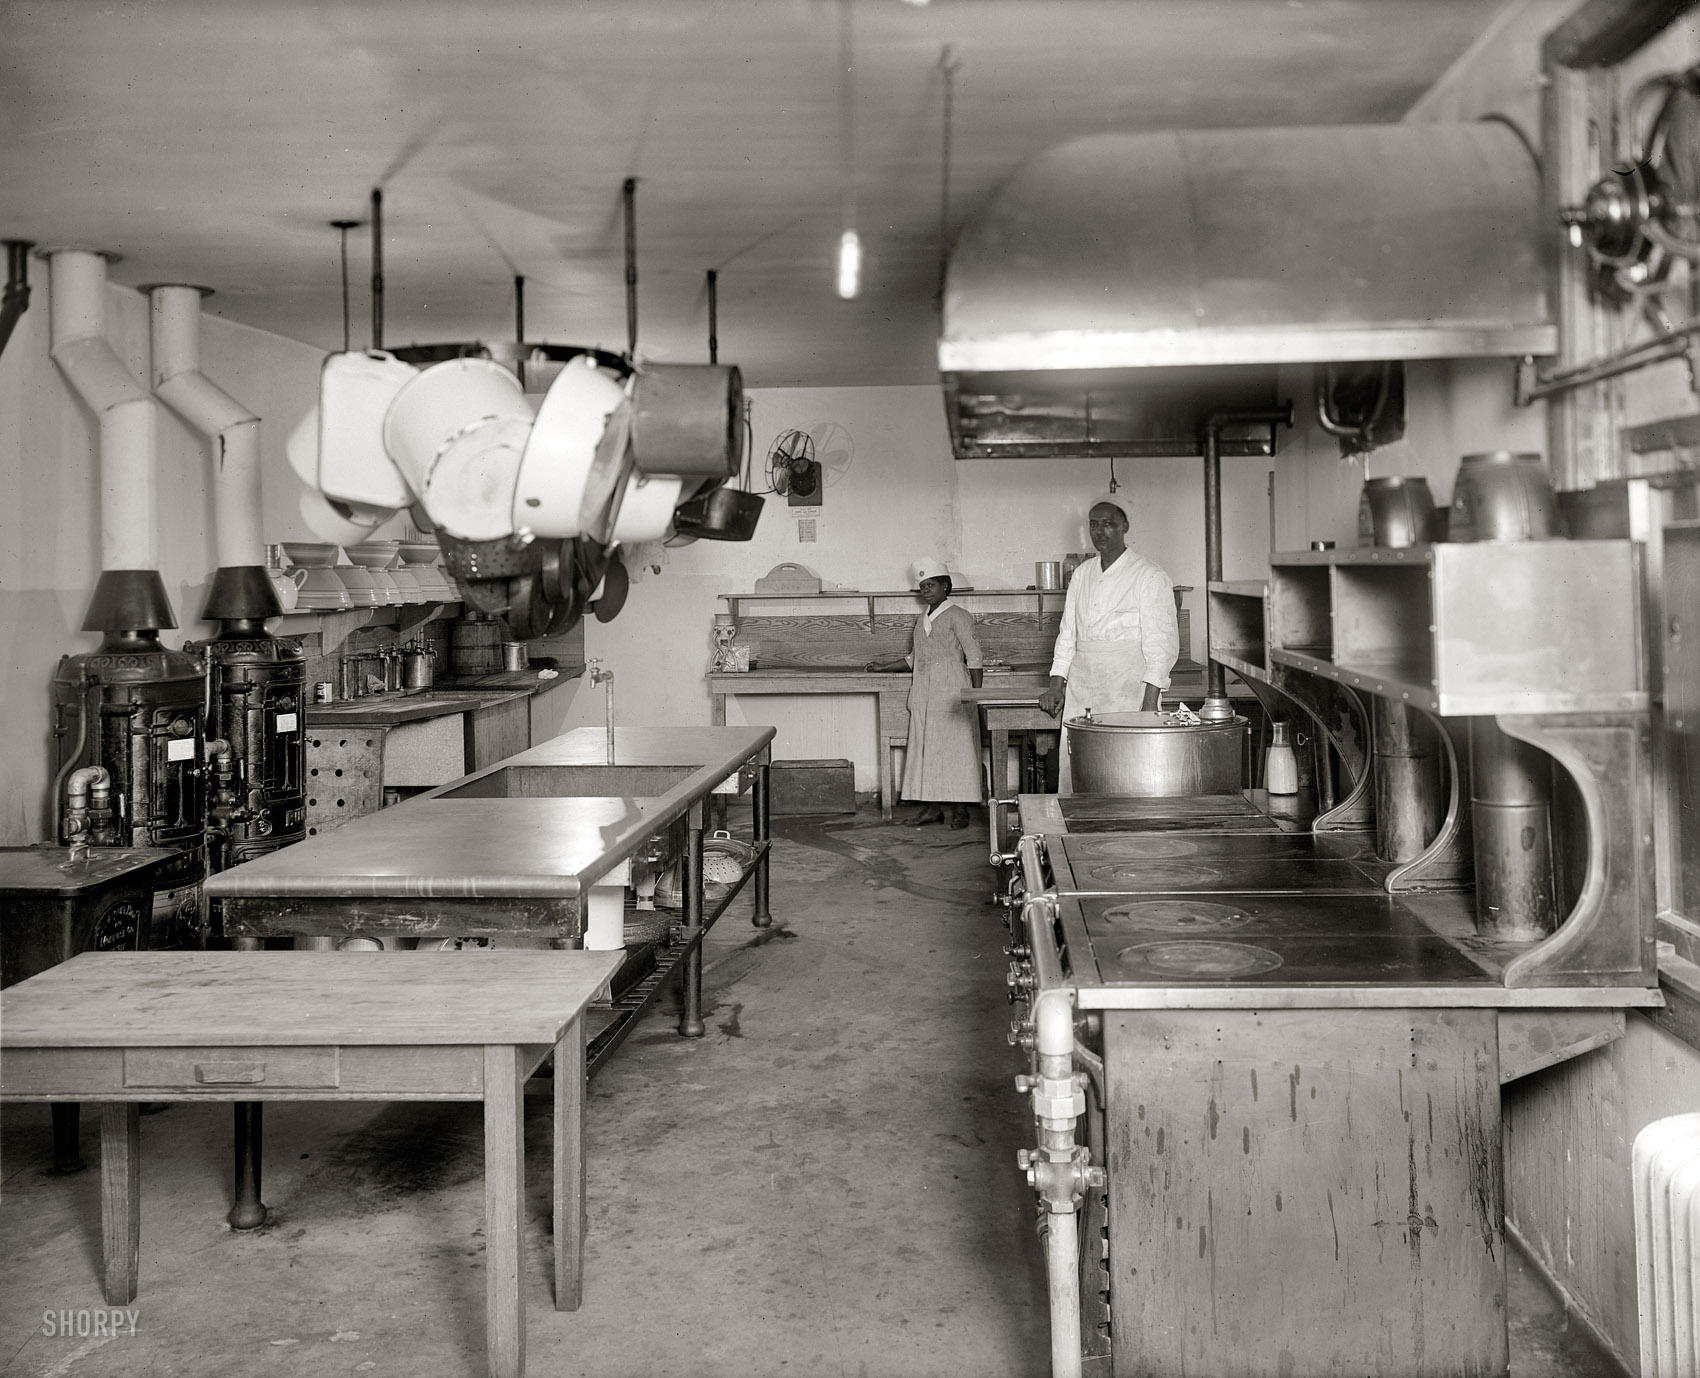 Washington, D.C., 1919. "Kitchen, U.S. Fuel Administration." Deep in the belly of the bureaucracy. Harris & Ewing Collection glass negative. View full size.